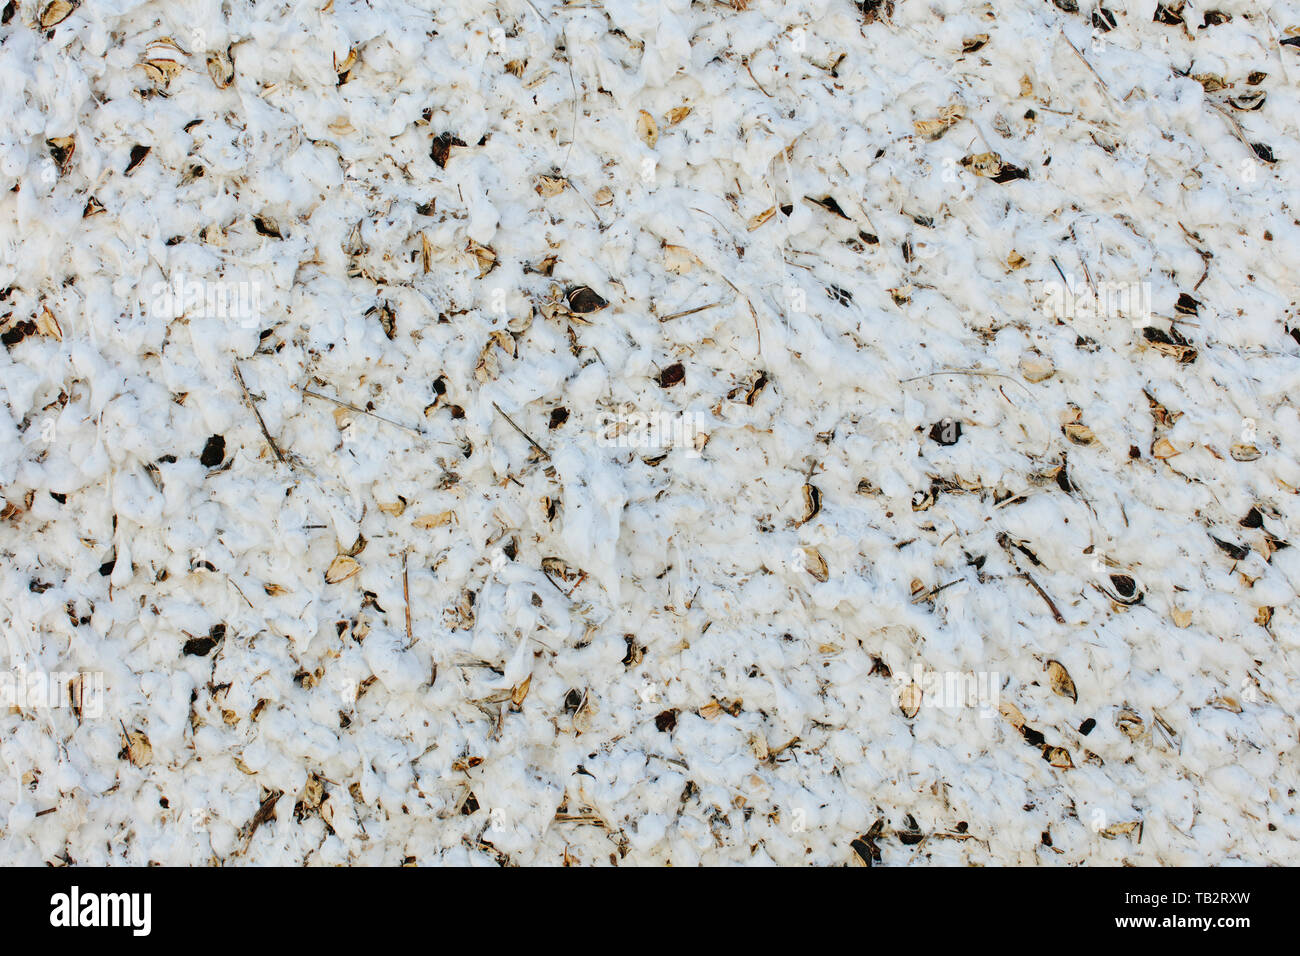 Close up of a cotton harvest, the white fluffy bolls of cotton seedhead packed together. Stock Photo